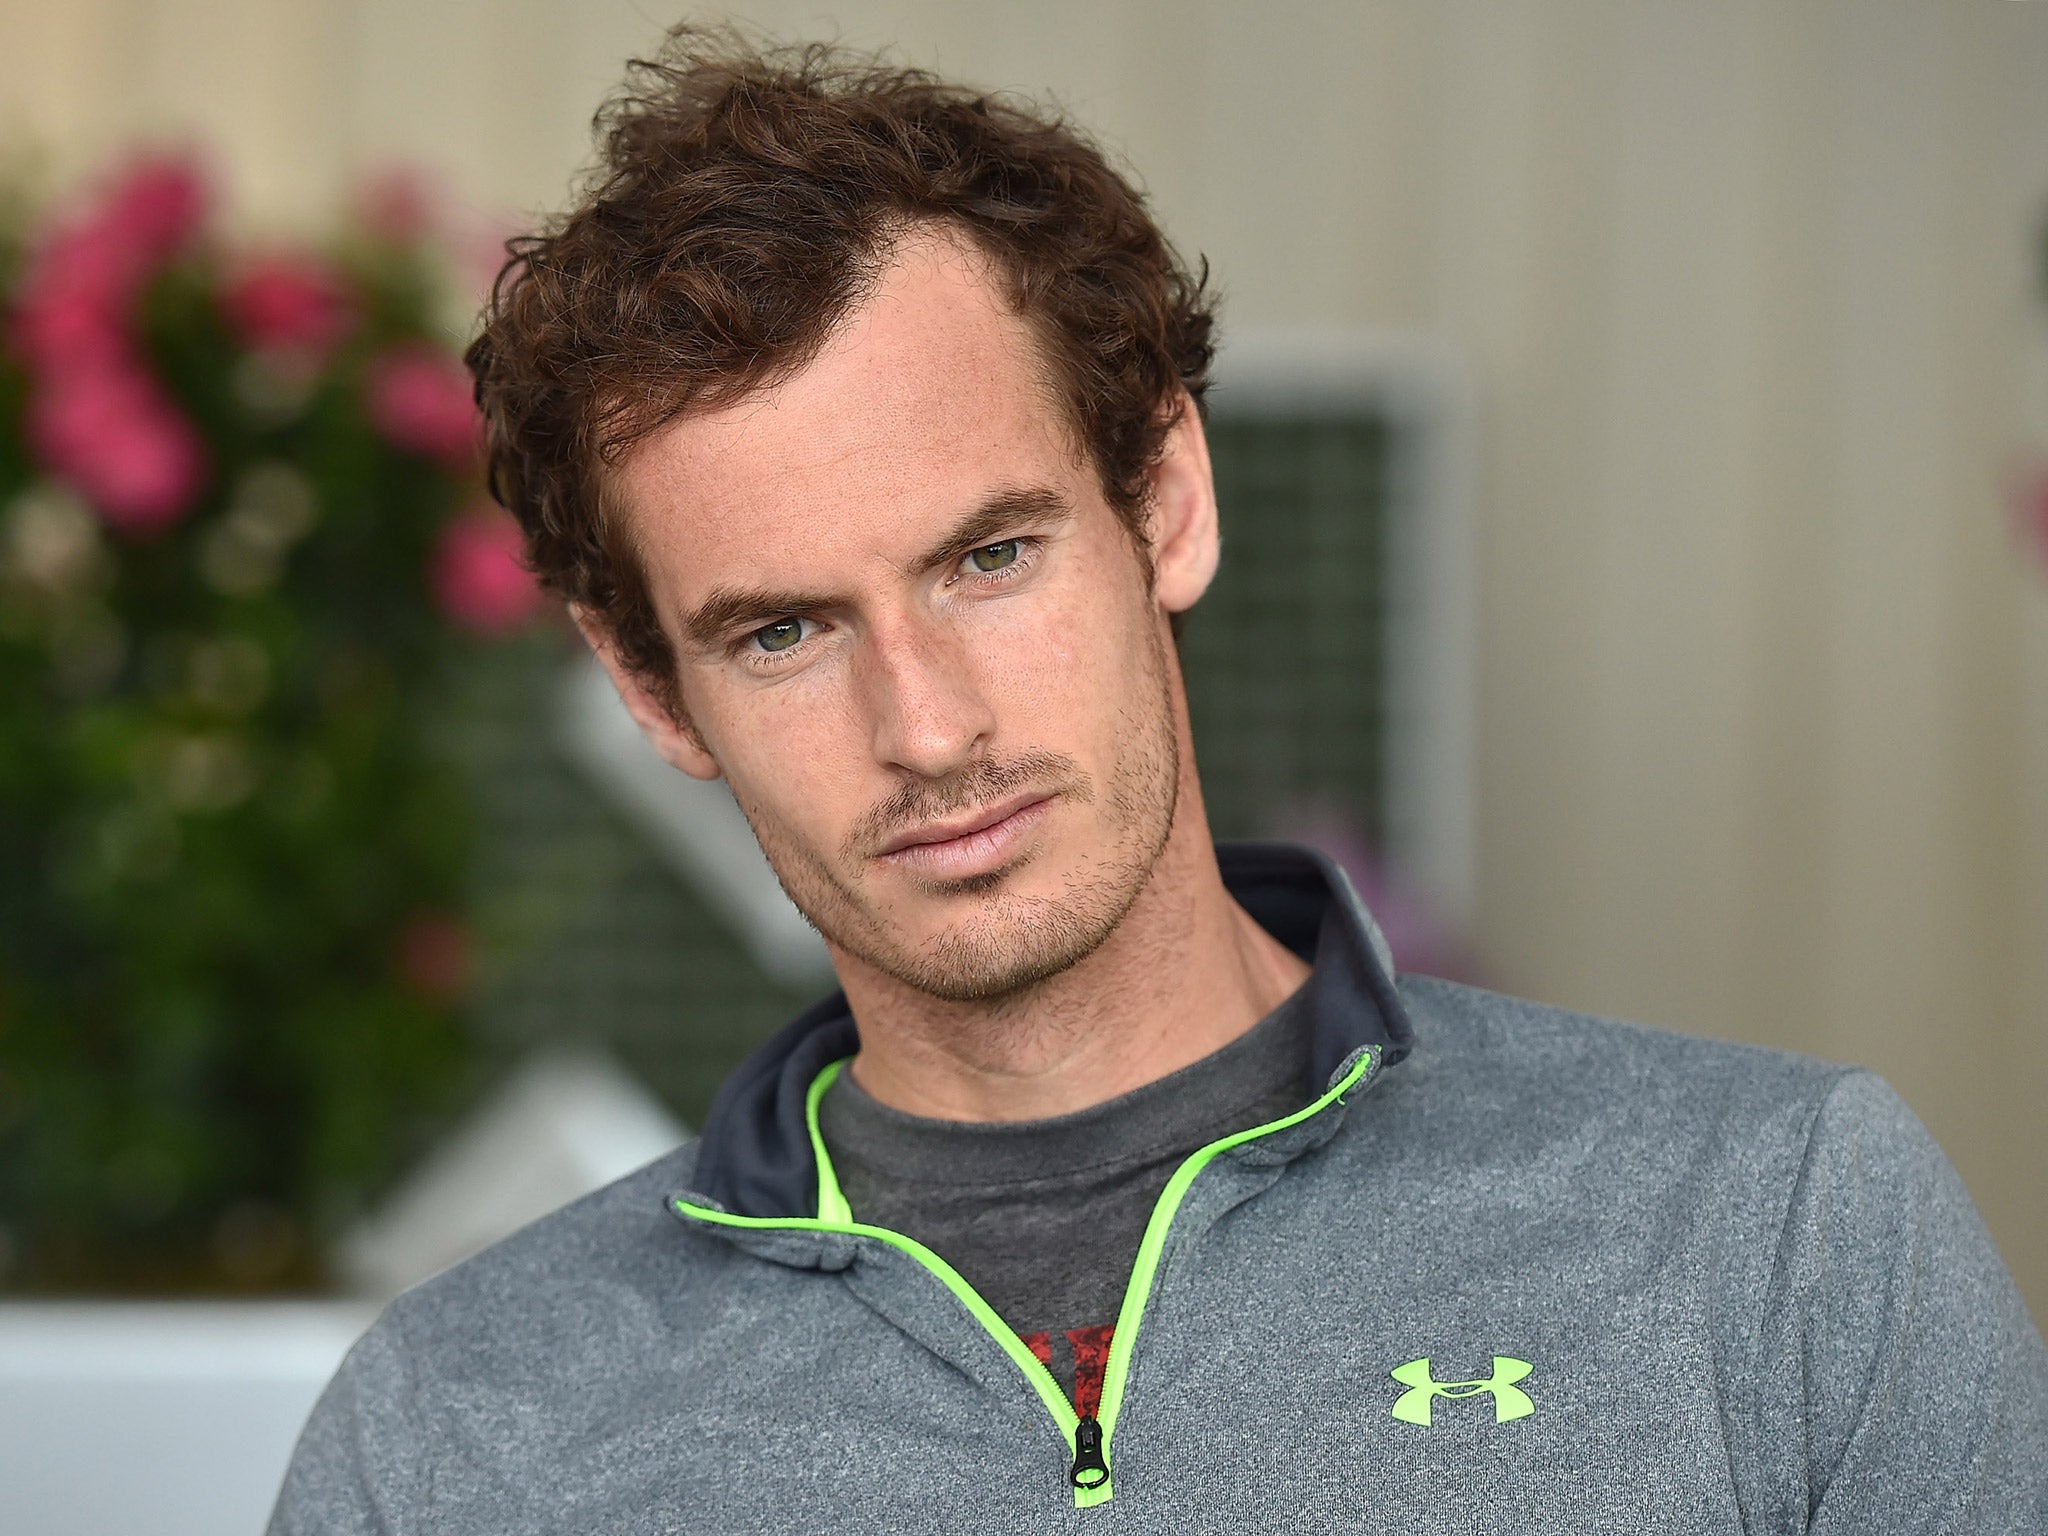 Andy Murray begins his clay court campaign at the Mote Carlo Masters this week